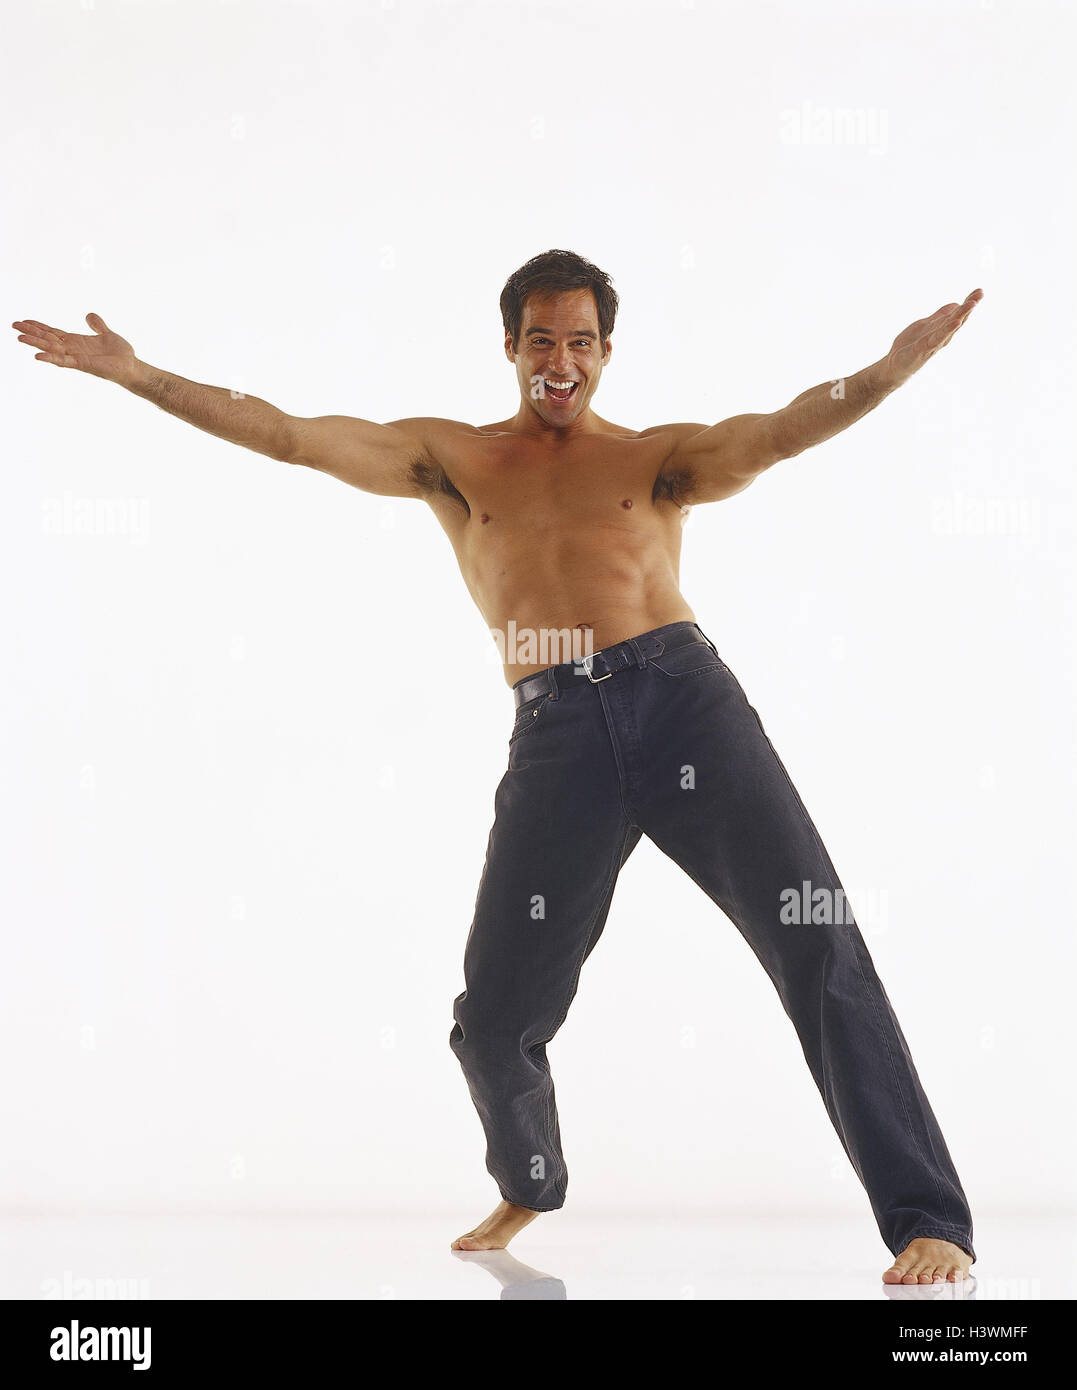 Men, barefoot, happy, funnily, melted, joy life, fun, enthusiasm, reunion, reception, warmly, studio, cut out, receive man, young, free upper part of the Body, jeans, gesture, joy, greeting, Stock Photo